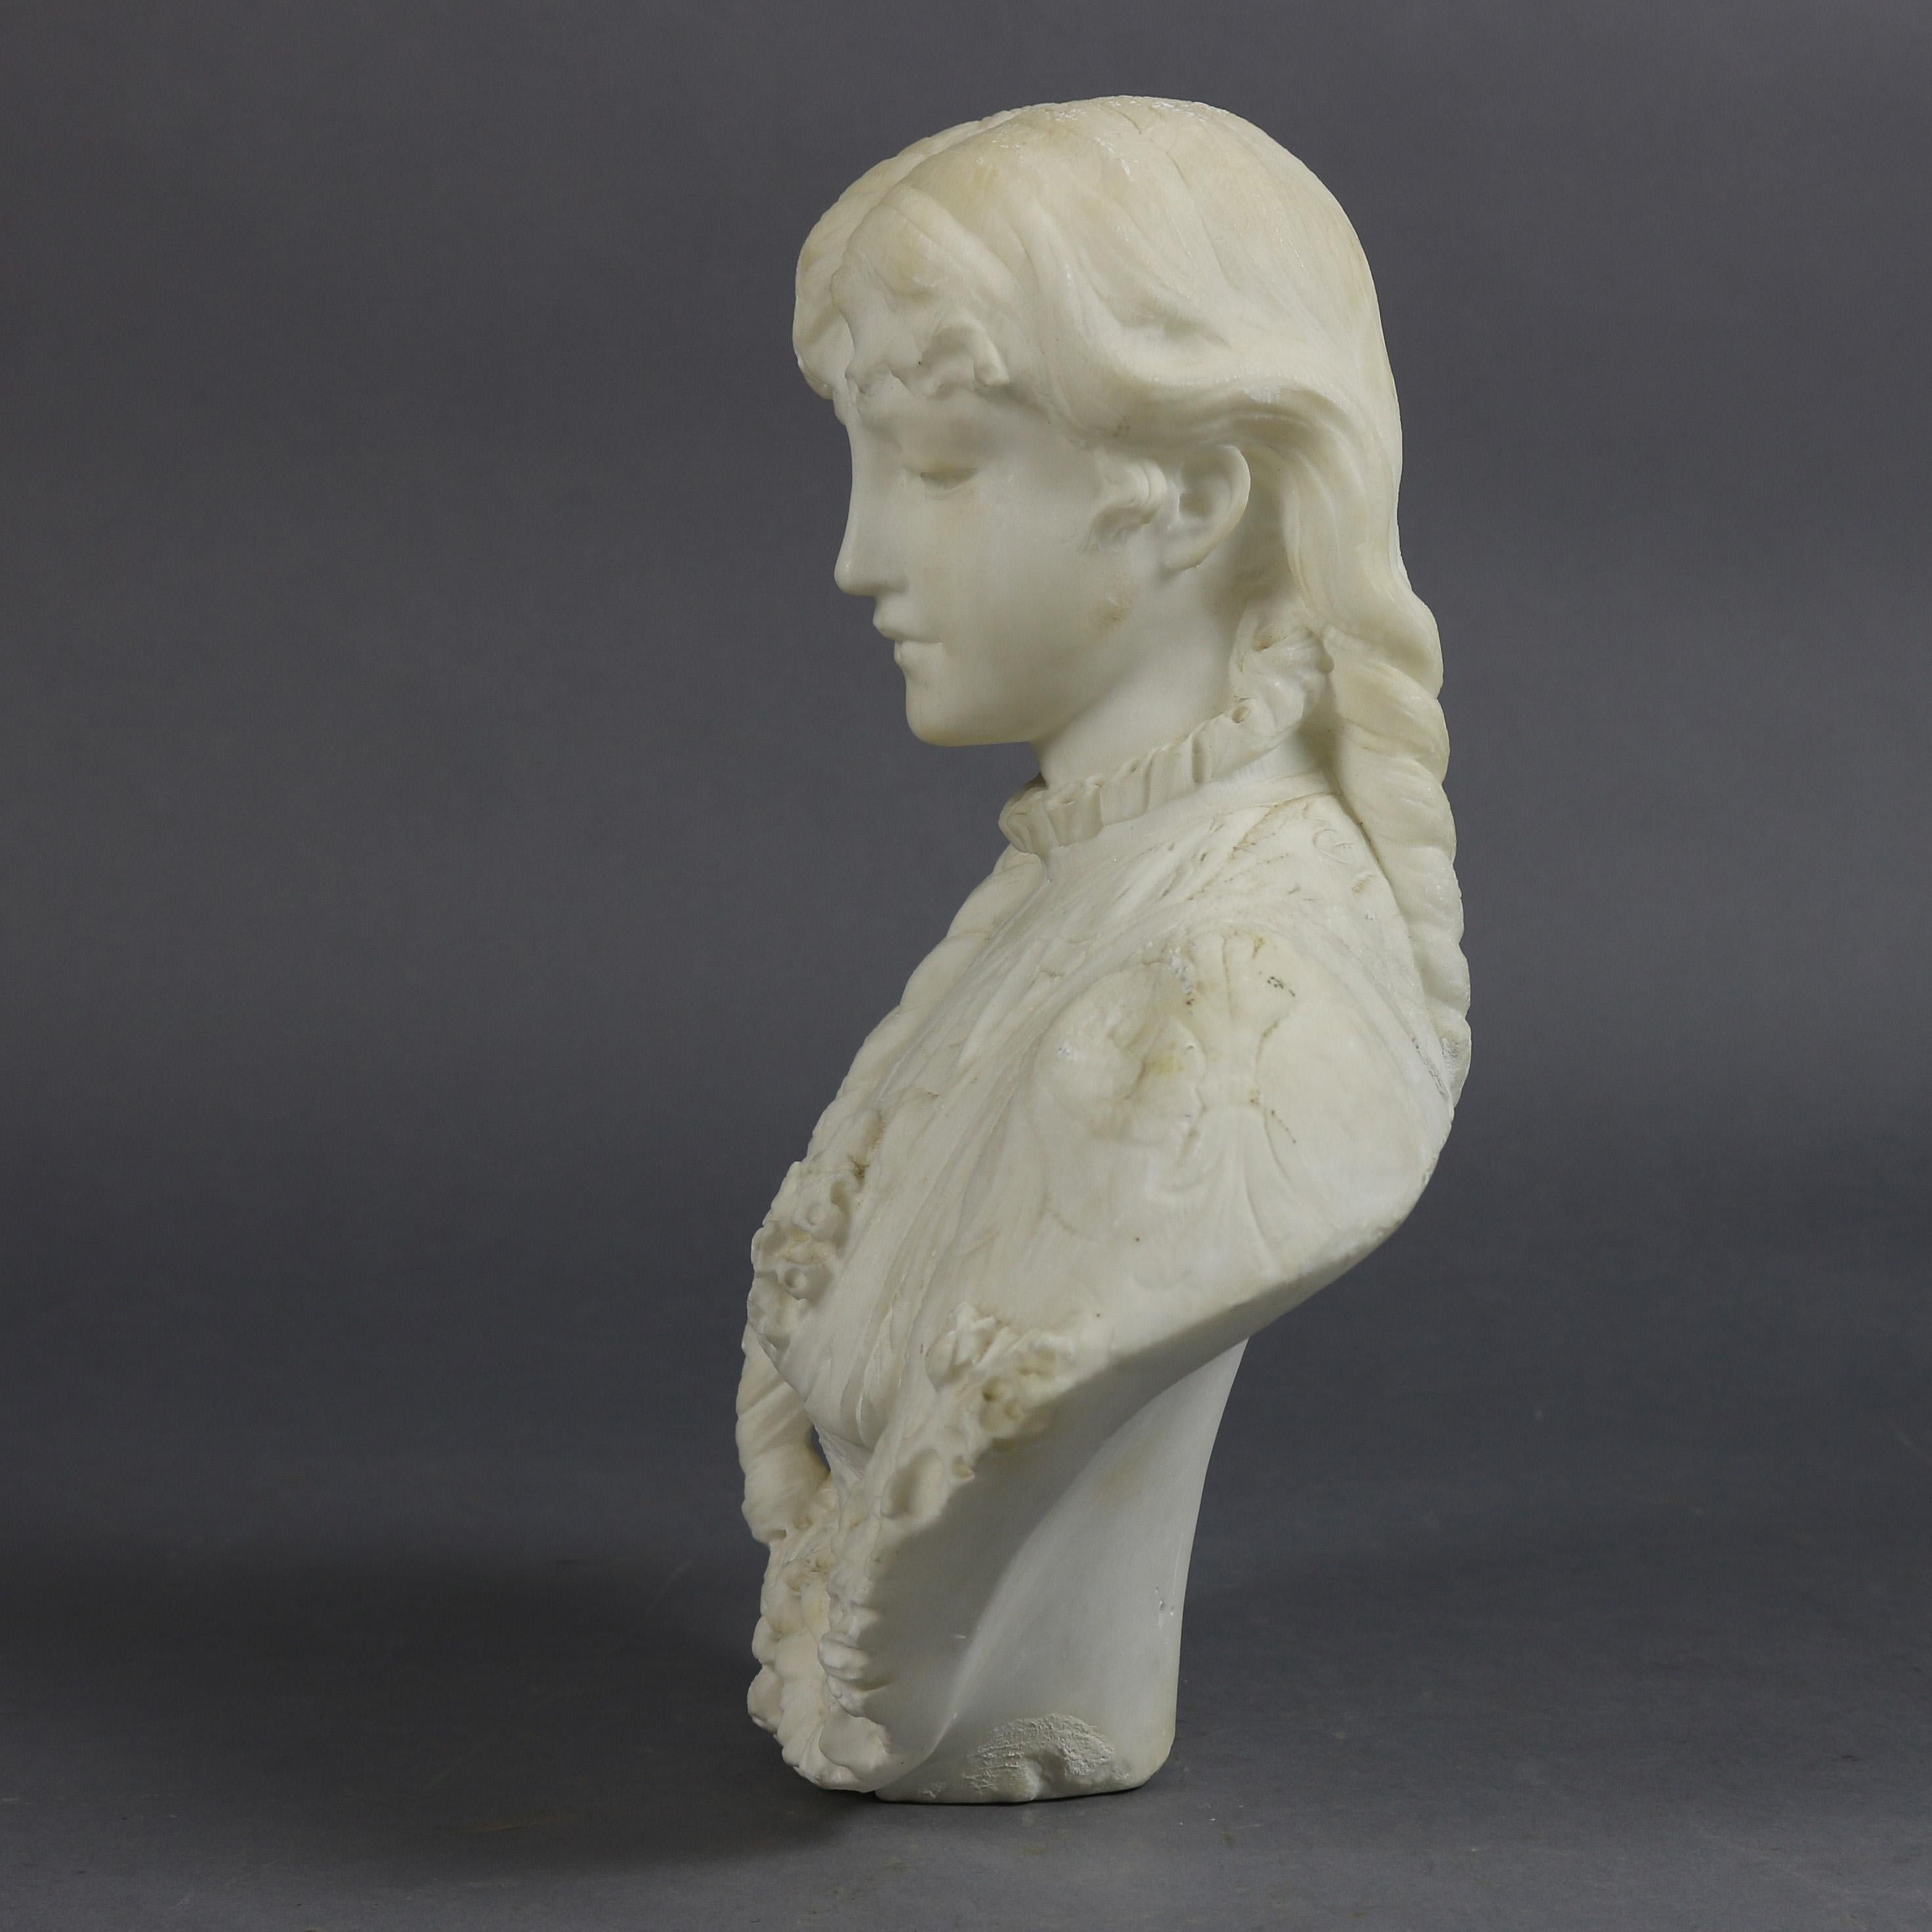 19th Century Antique Classical Italian Carved Alabaster Young Woman Portrait Sculpture